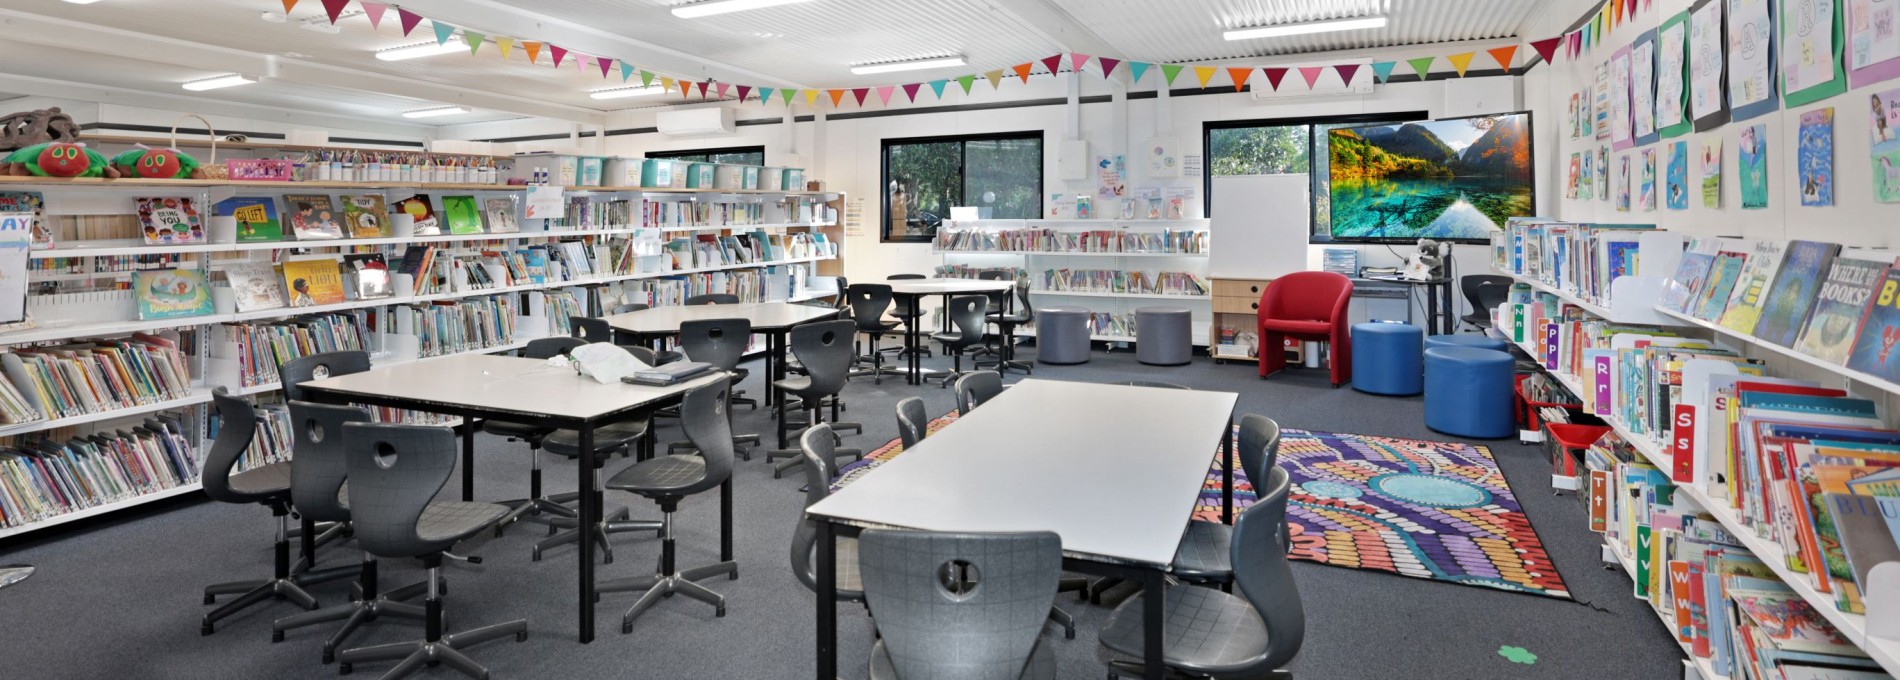 Internal view of temporary library facilities